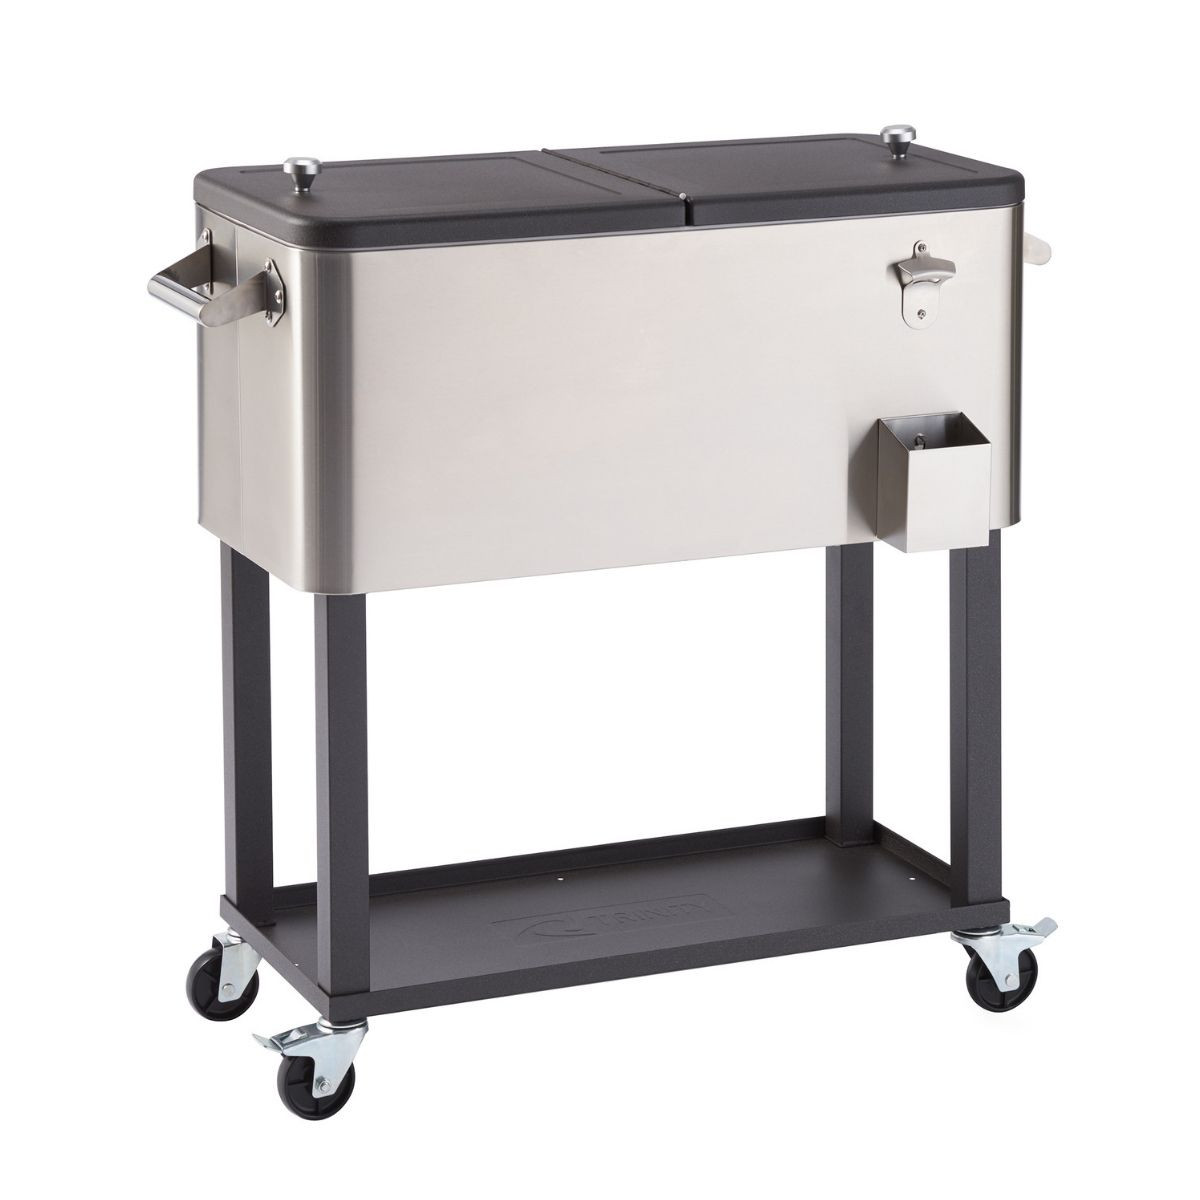 Top Chef 80 qt. Stainless Steel Cooler - 35.75 x 36 x 18.5 in.